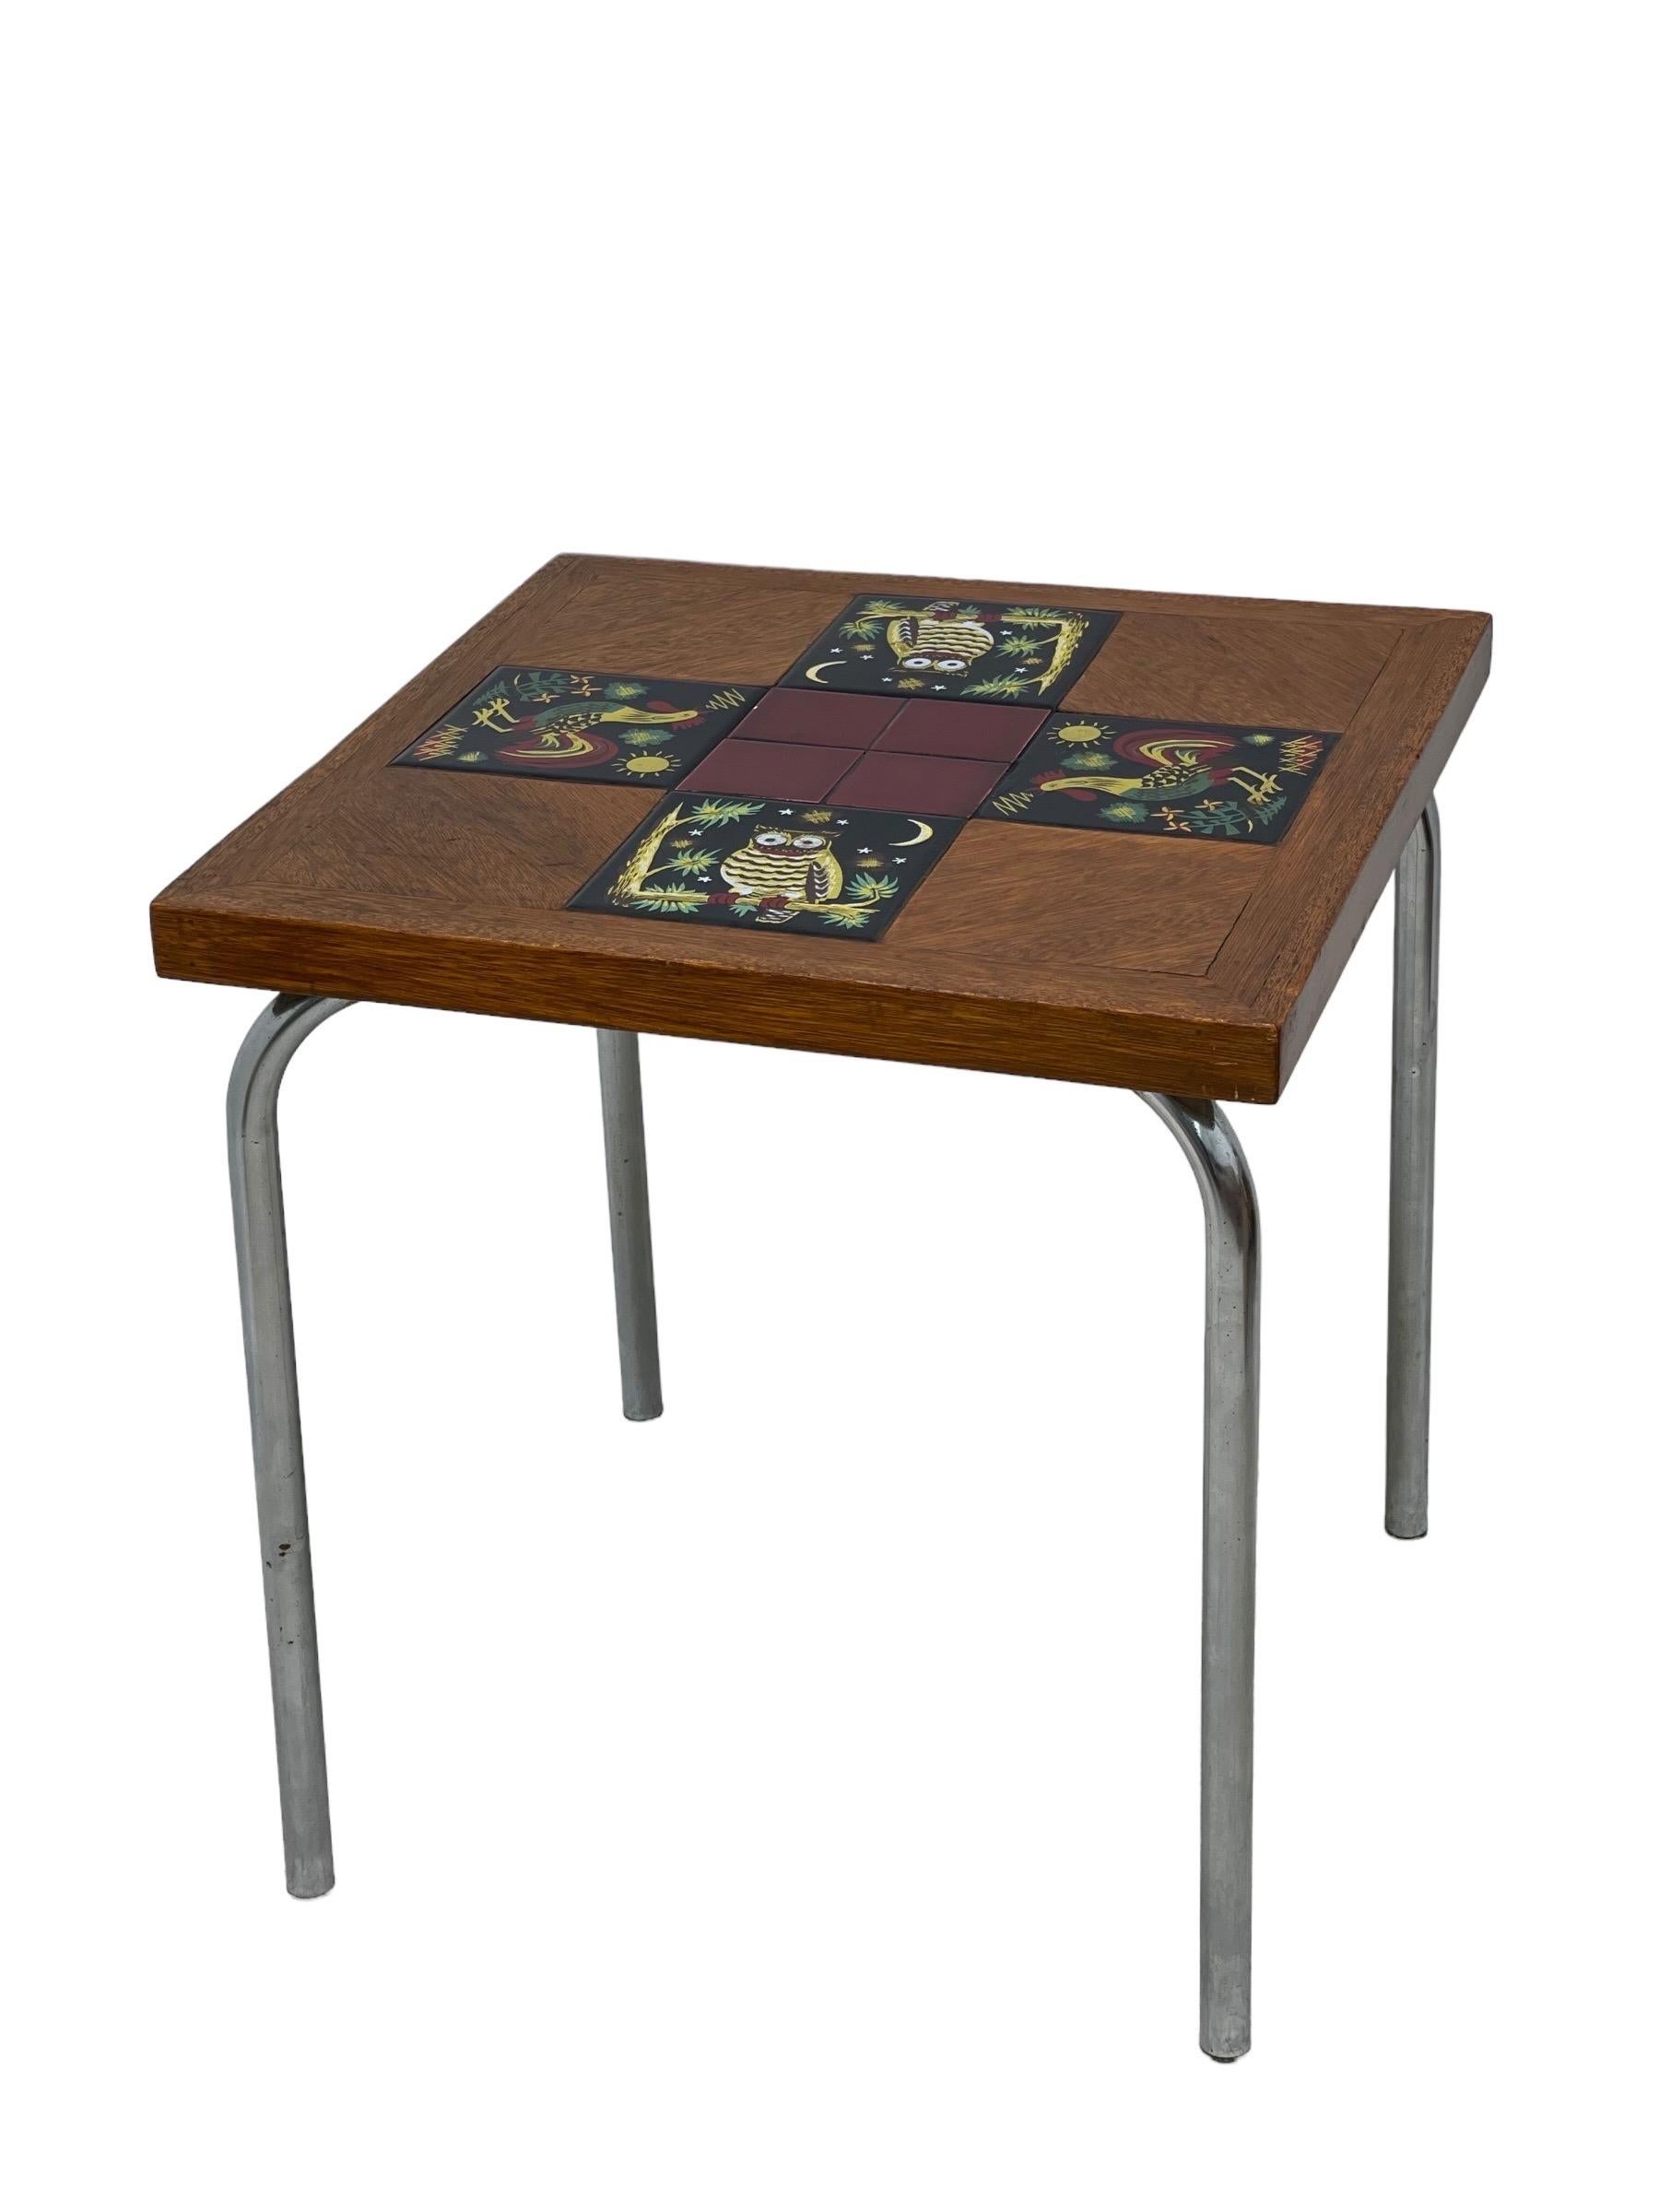 Mid-Century Modern Vintage Mid Century Tile Top End Table or Accent Stand
 For Sale